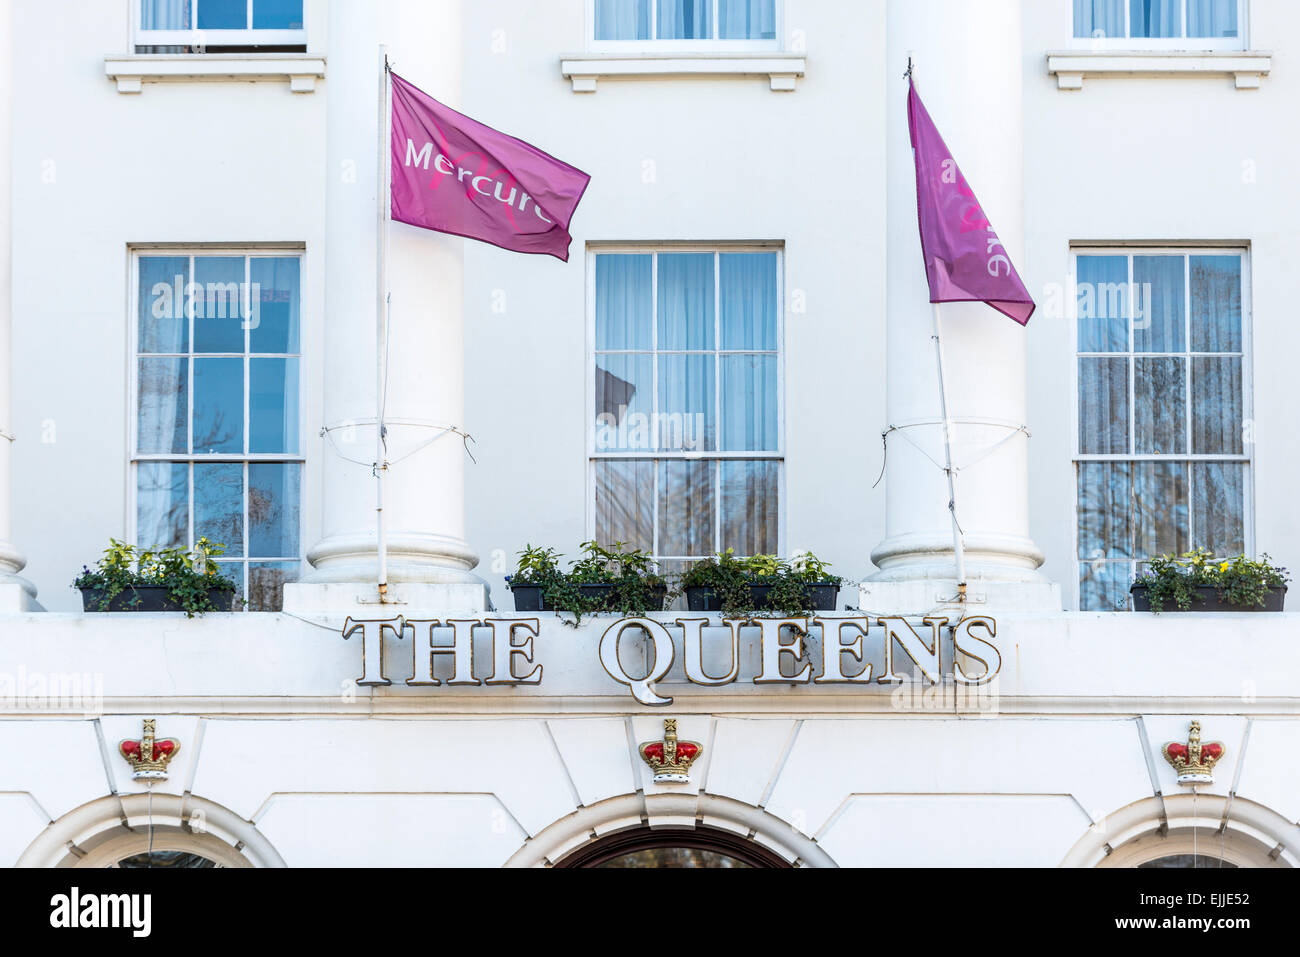 The Queen's Hotel is a landmark hotel in Cheltenham, Gloucestershire, UK now owned by Mercure Stock Photo